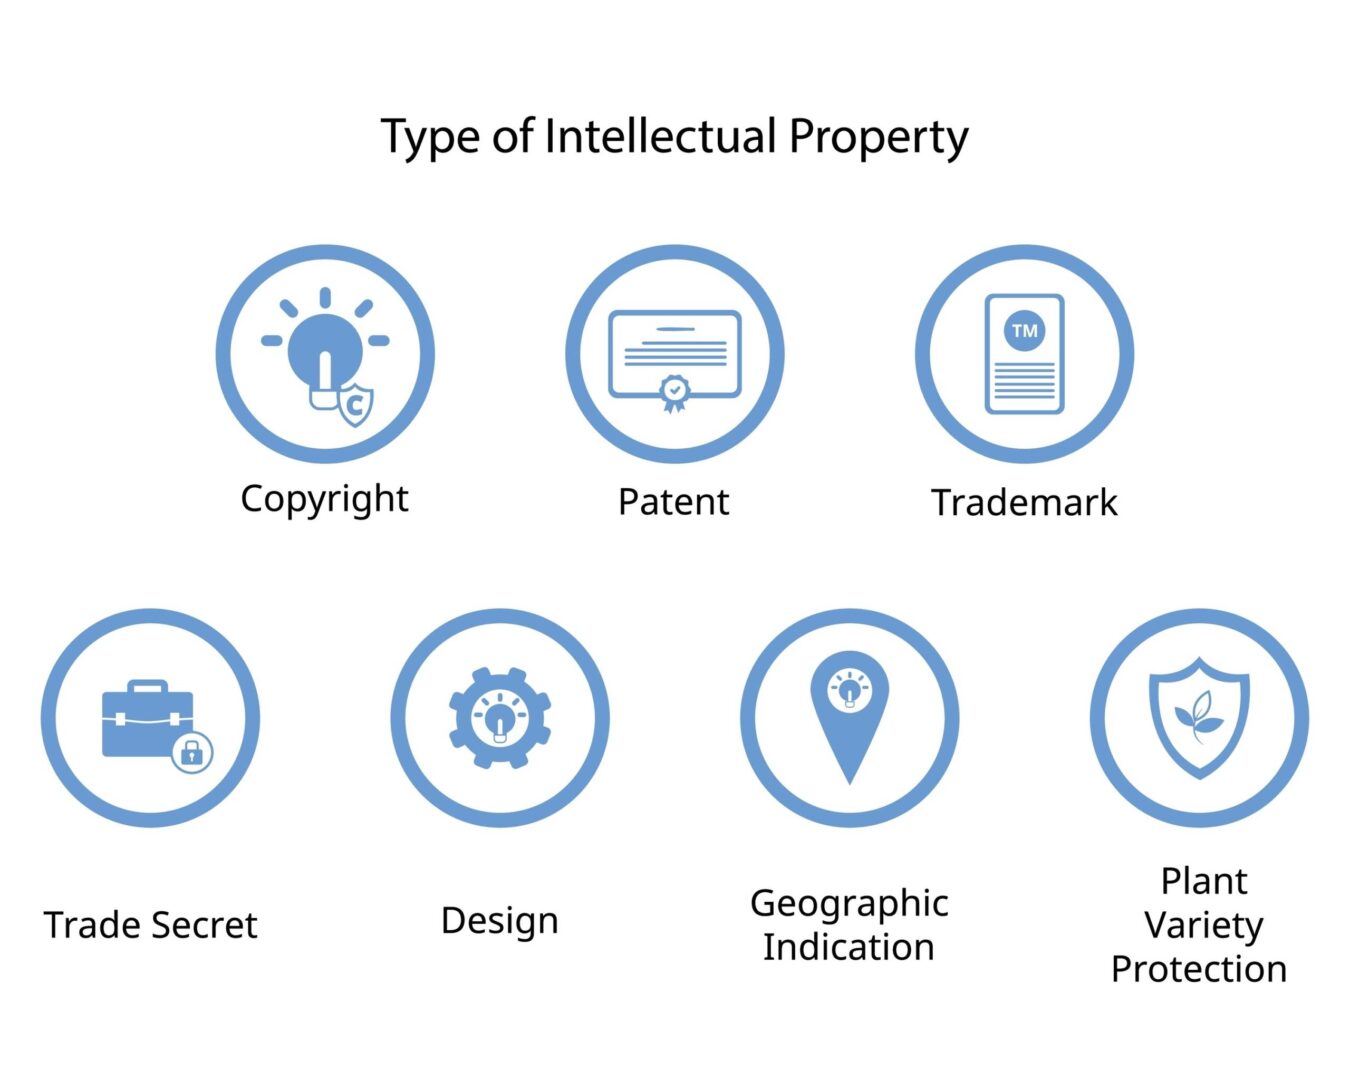 Types of intellectual property rights